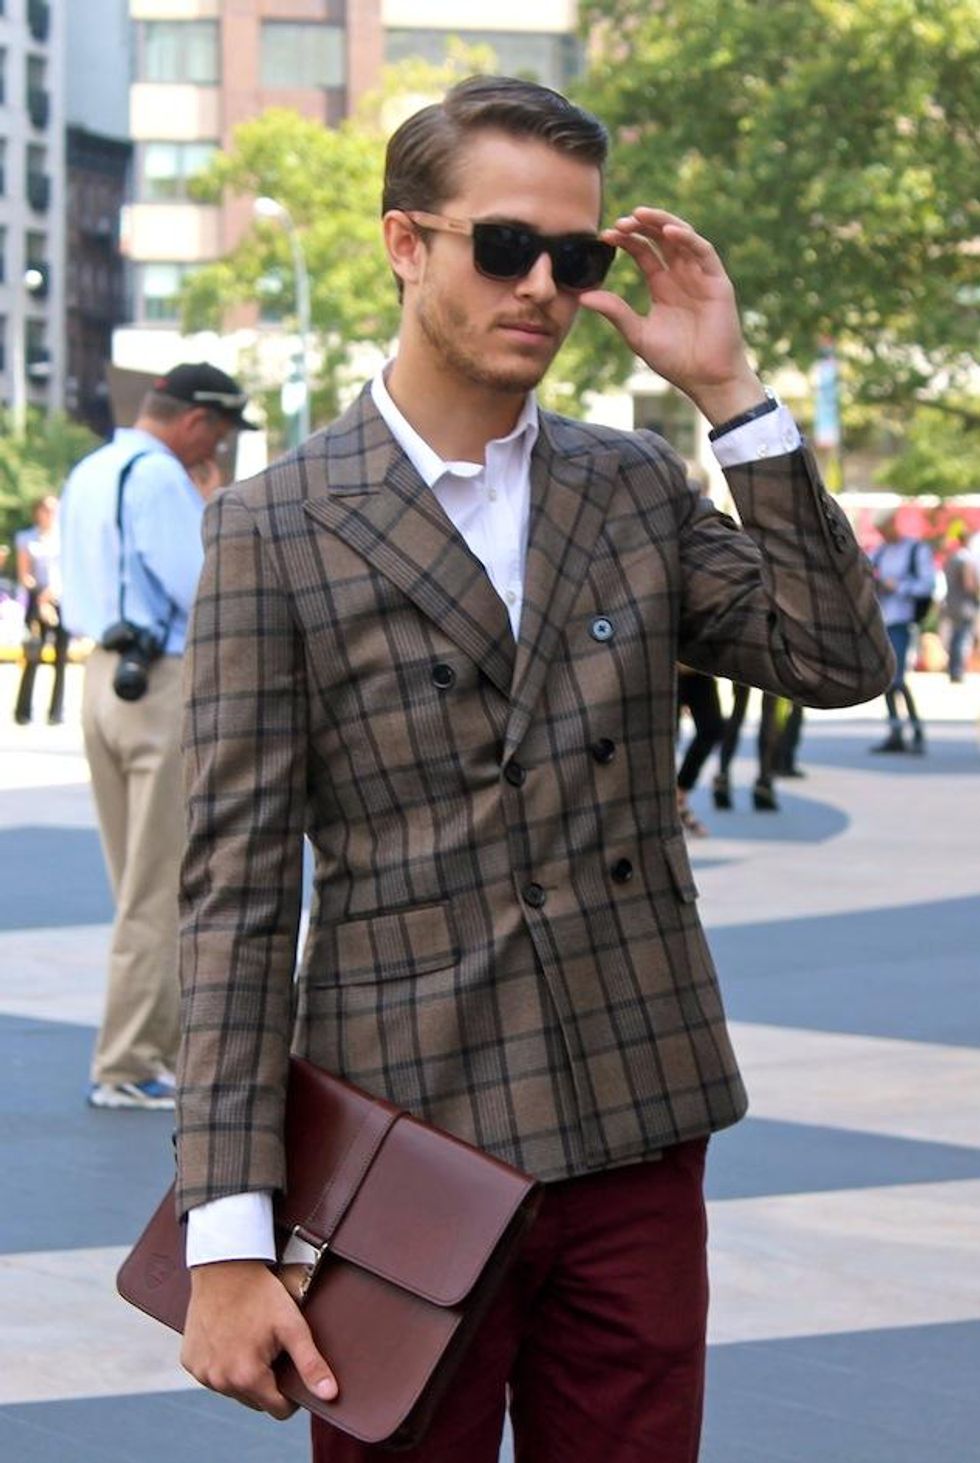 OUT On The Street at NYFW: Blogger IAMGALLA's Fall Colors